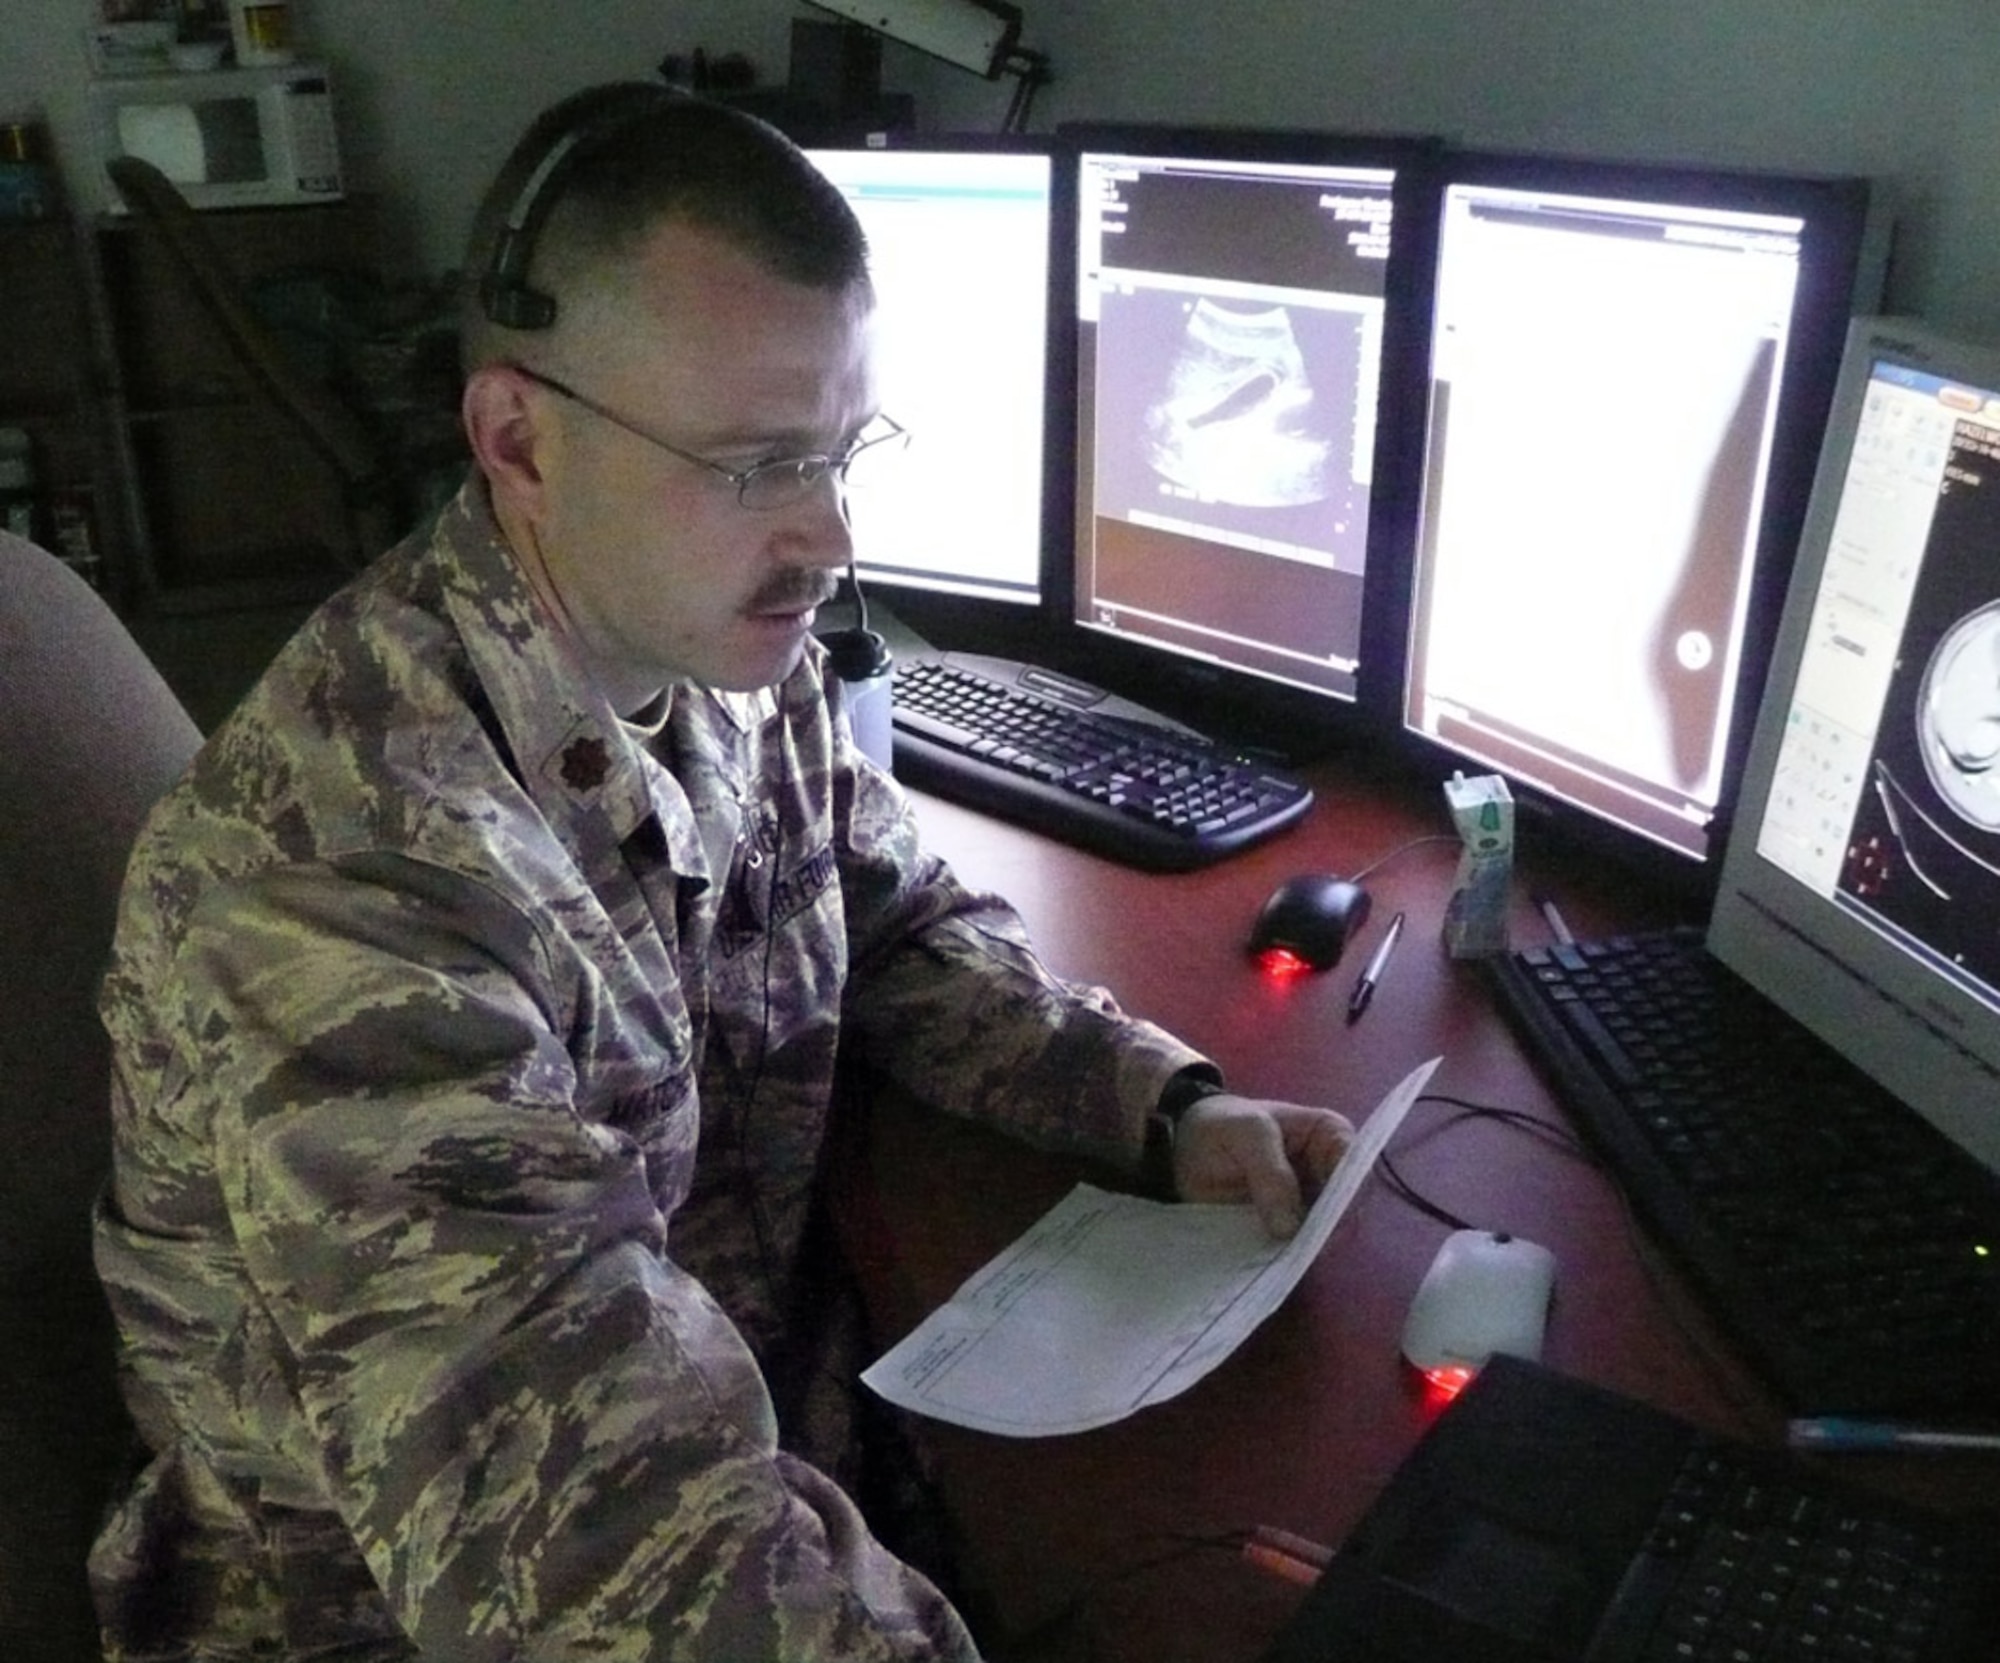 Maj. Michael Matchette, an Air Force radiologist at the Air Force Theater Hospital at Balad Air Base, Iraq, uses voice recognition software to quickly dictate his radiology readings electronically into the Medical Communications for Combat Casualty Care, or MC4, system. (U.S. Air Force photo)